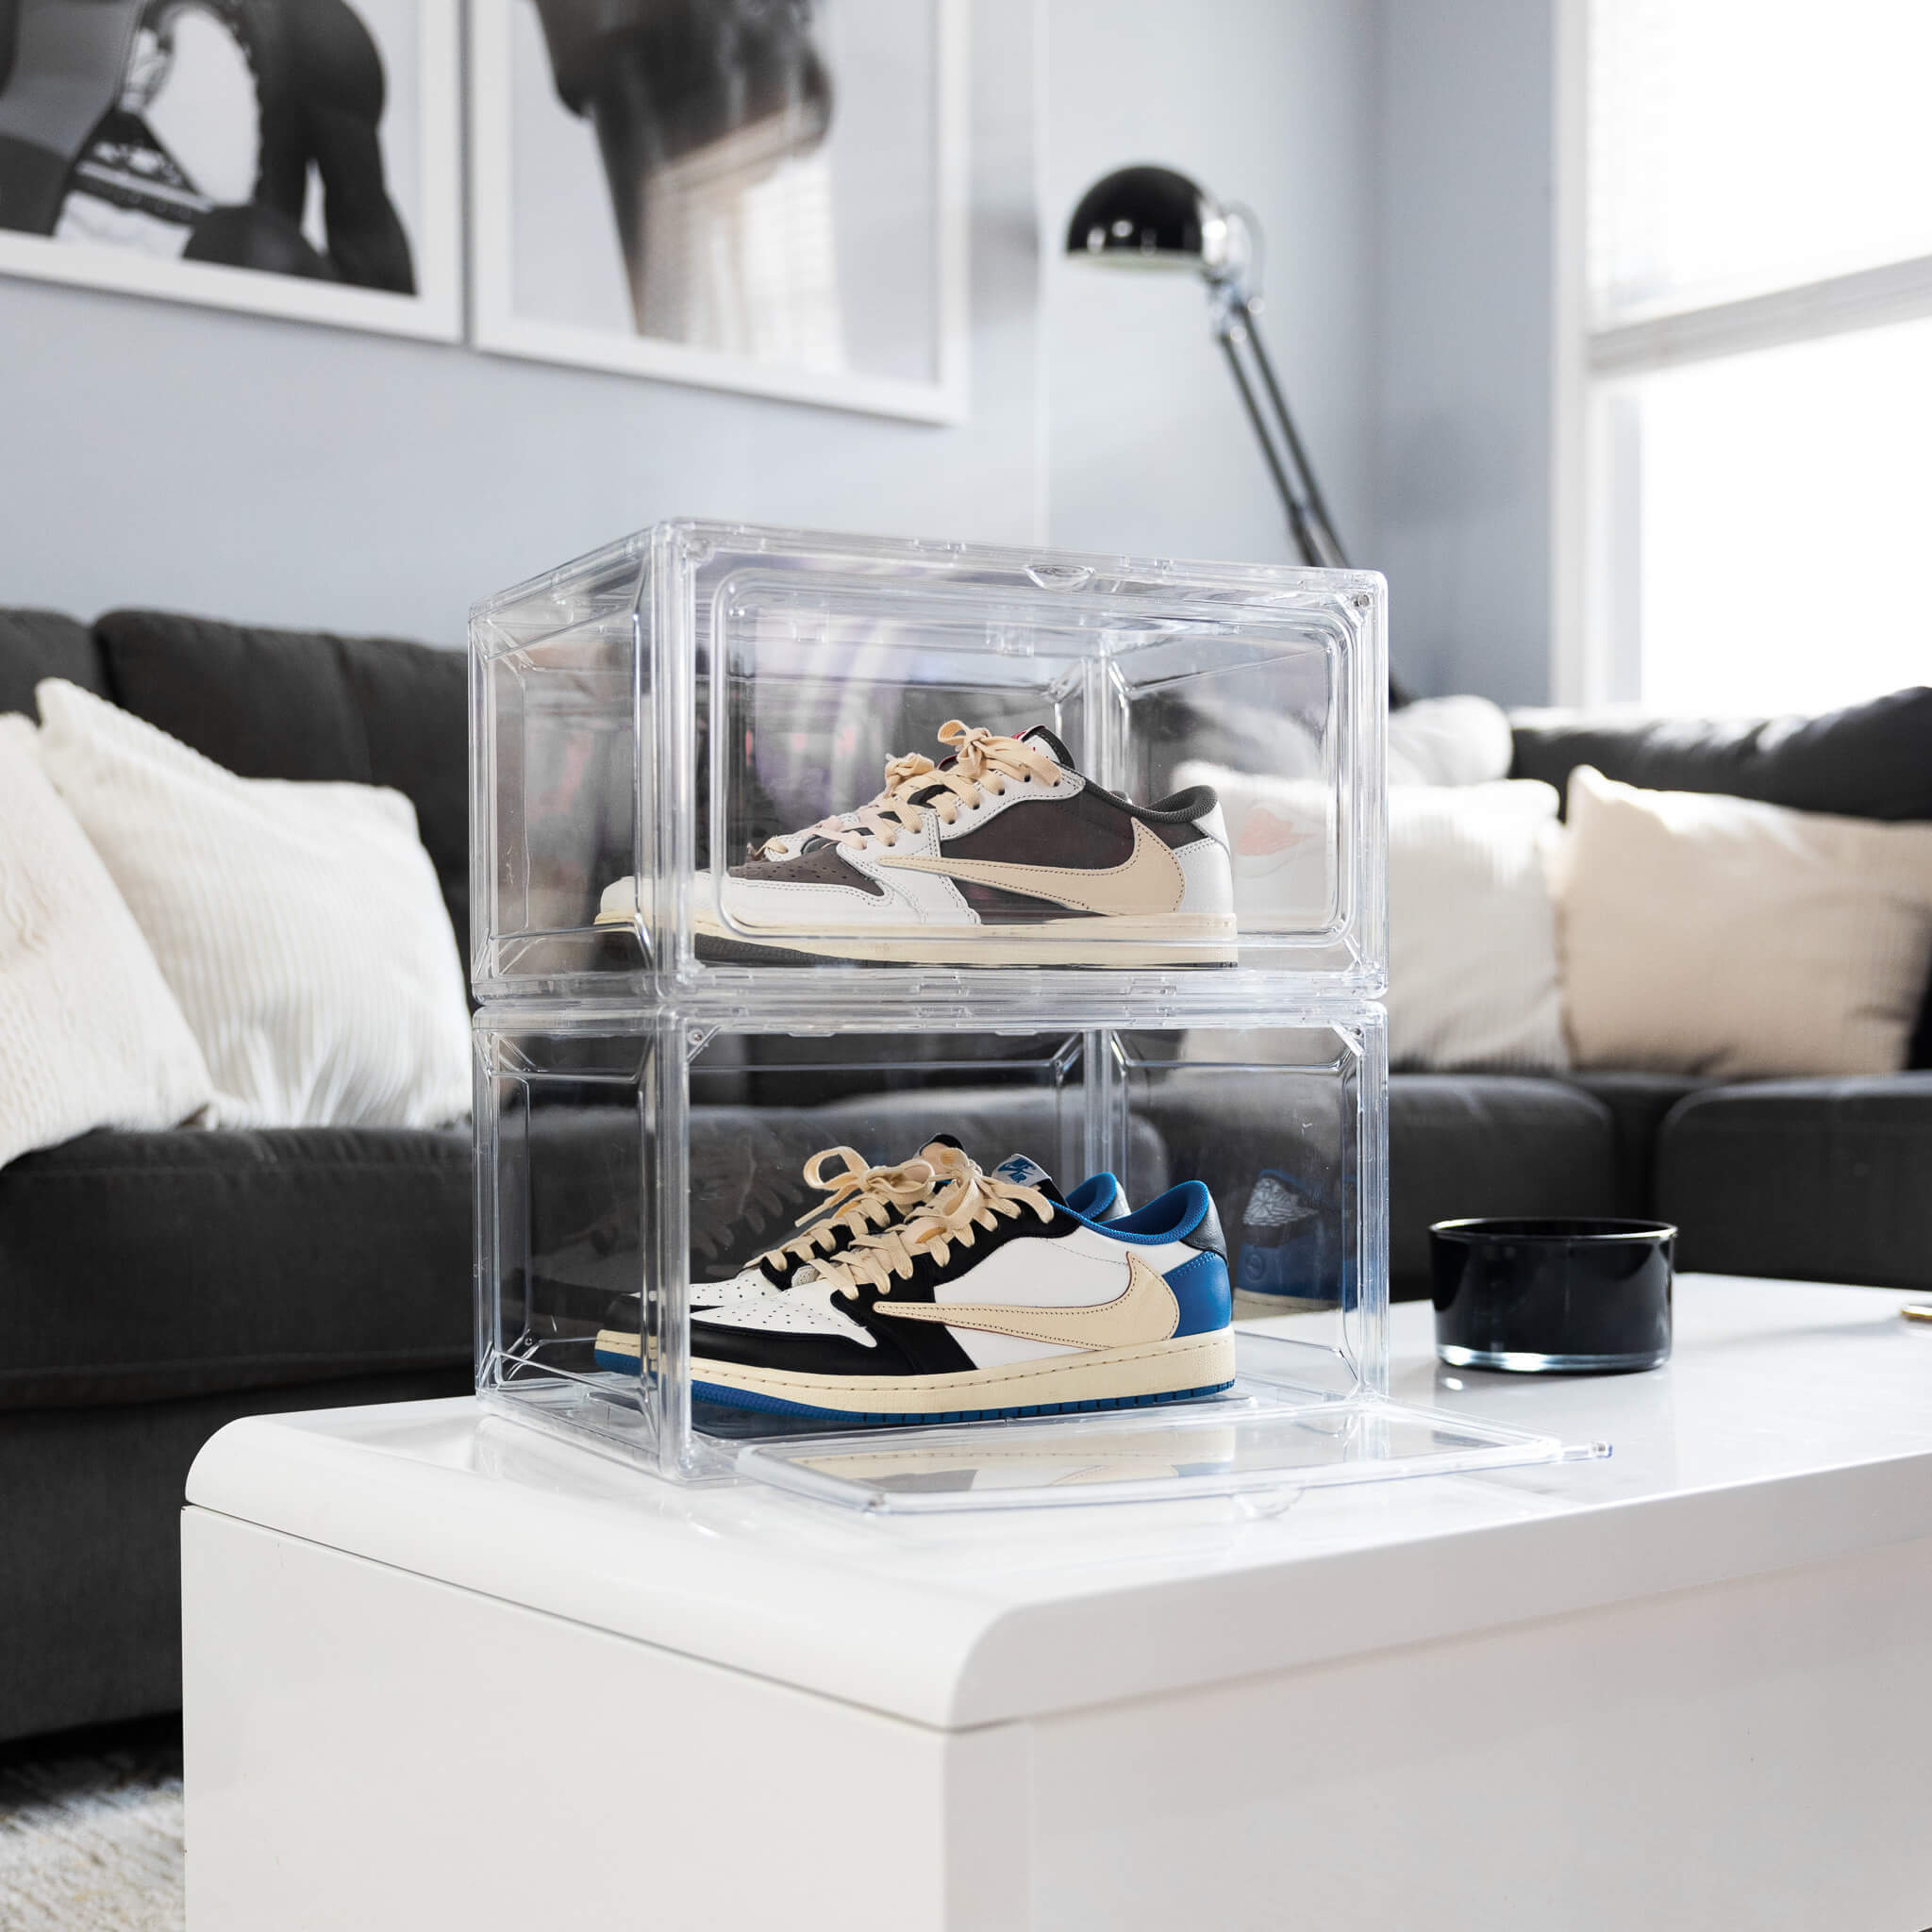 Looksee Designs - Sneaker Display Case - Shoe Display Case - Acrylic Shoe Box - Storage For Sneakerheads - Shoe Cases - Sneaker Throne - Premium Acrylic Display - Shoe Collection - Acrylic Organizer